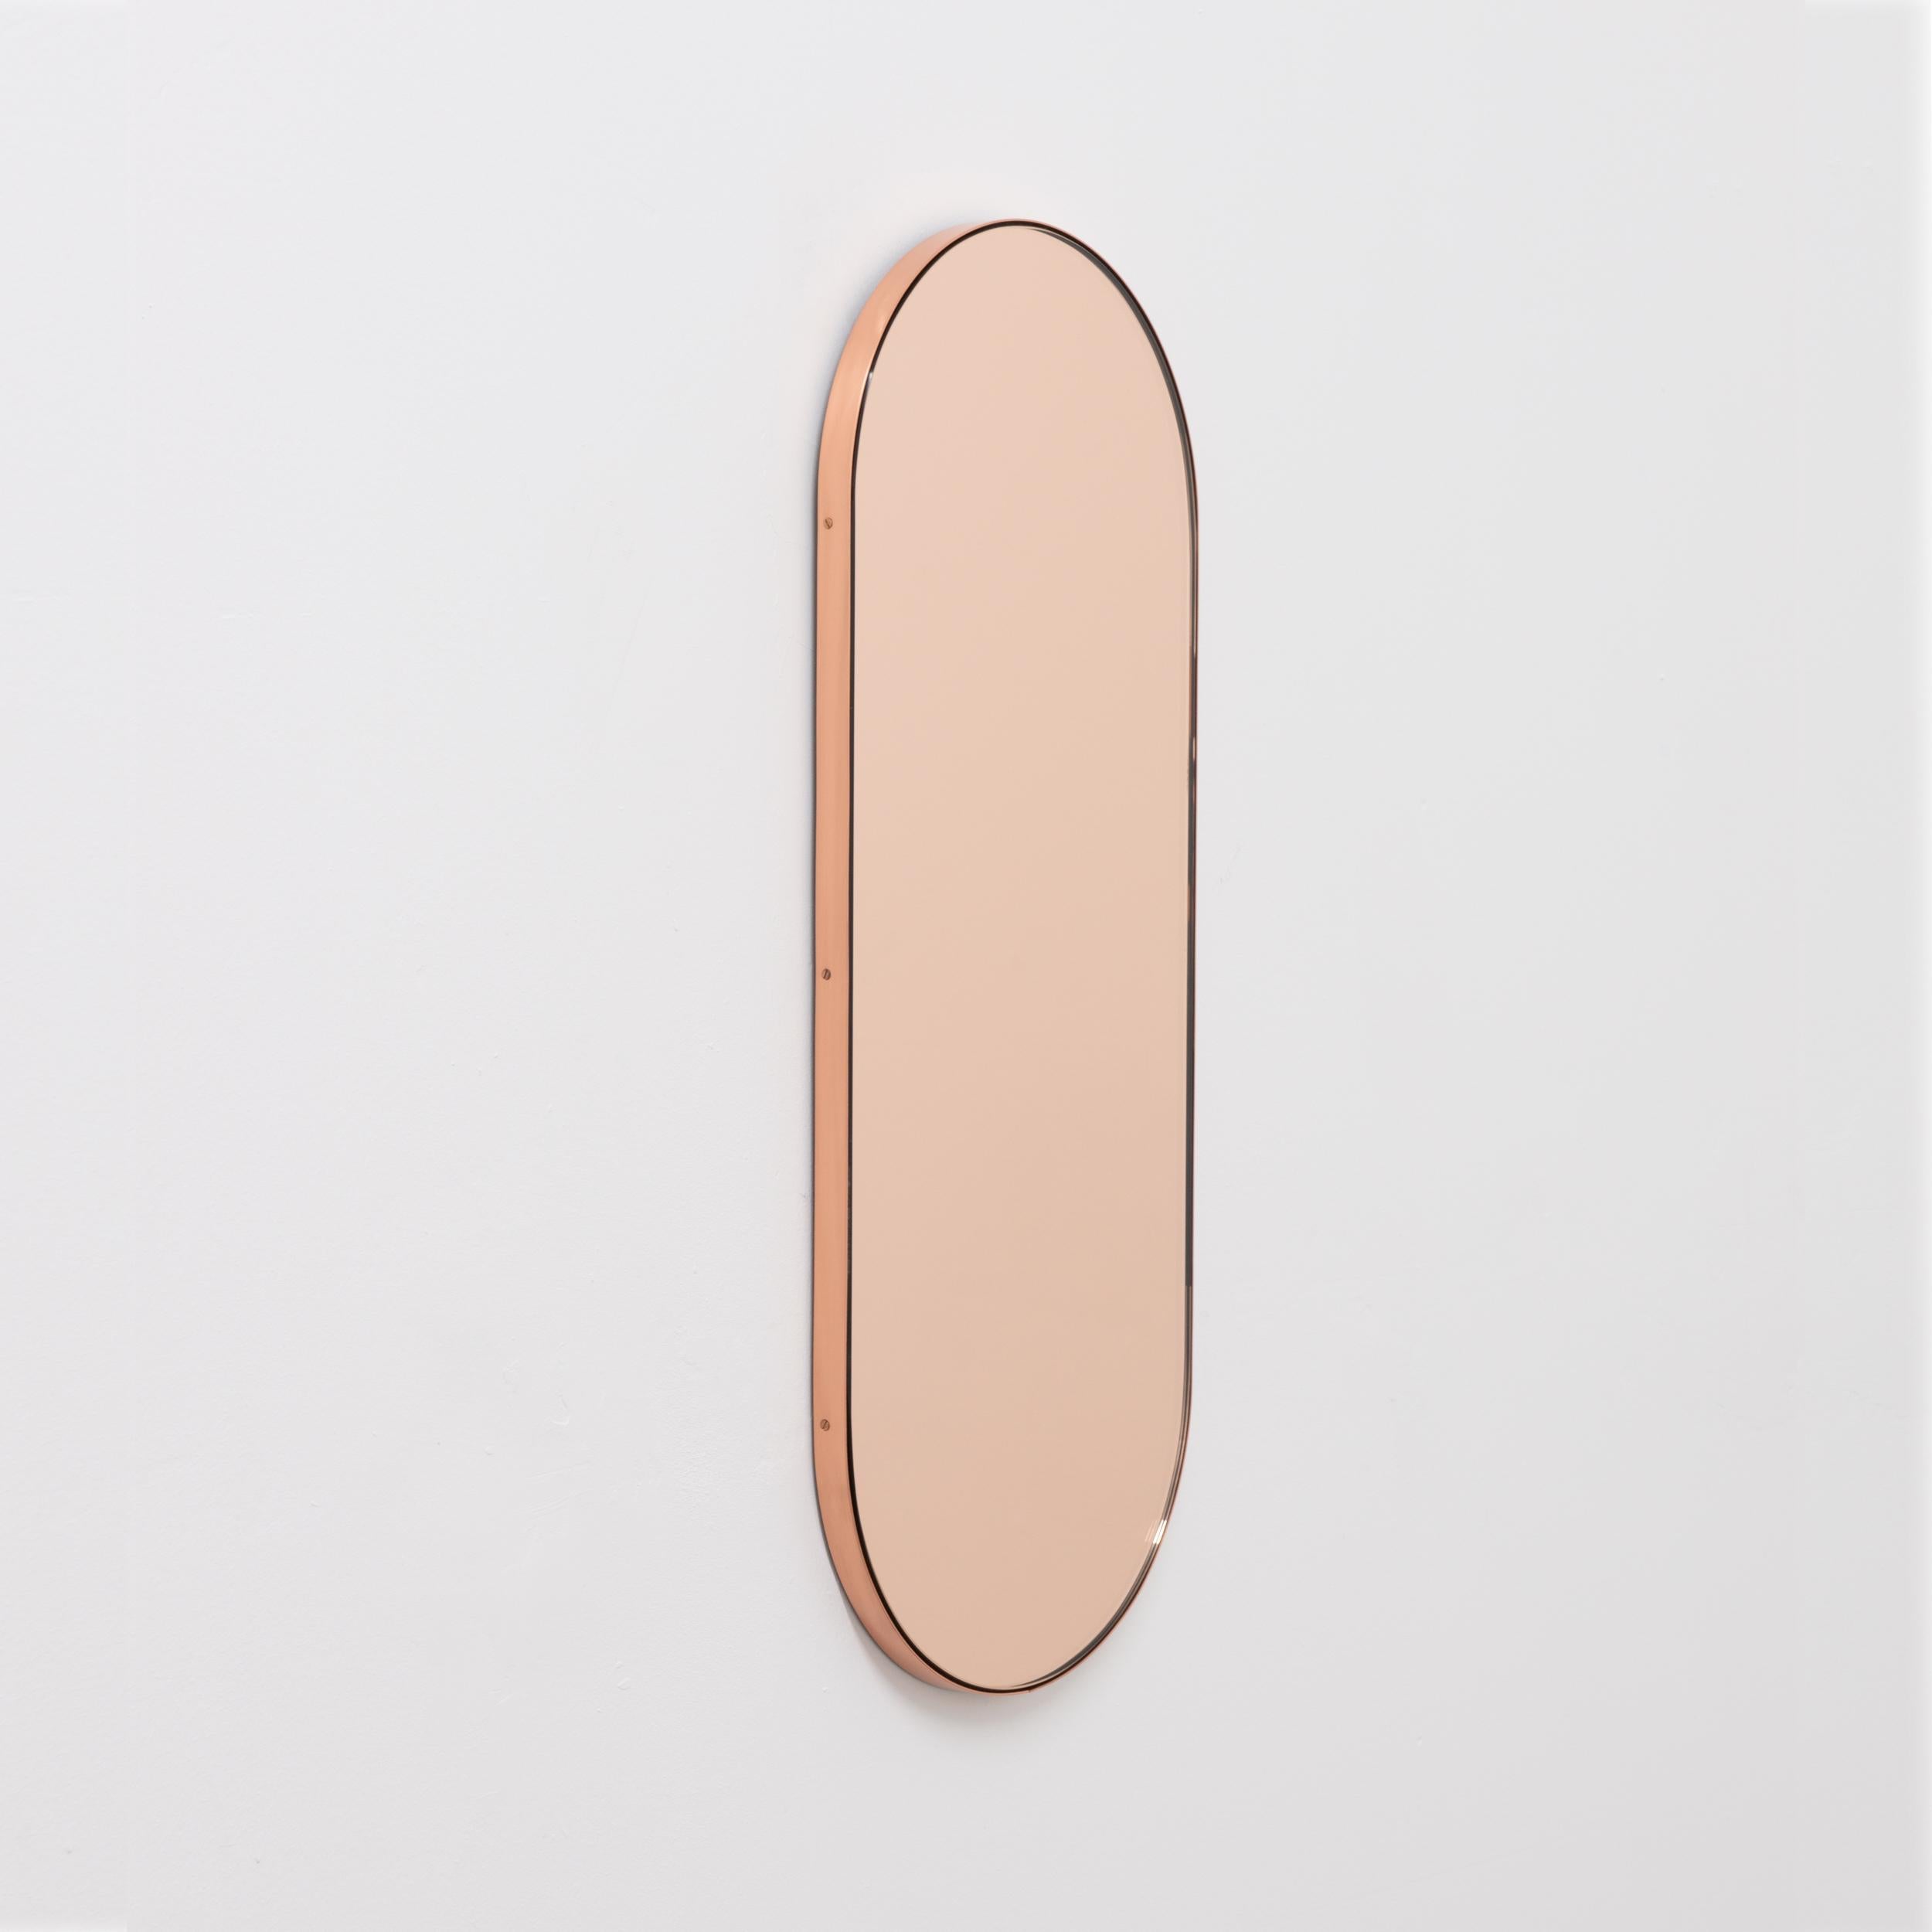 Capsula Capsule Shaped Rose Gold Mirror with Copper Frame, Medium For Sale 2